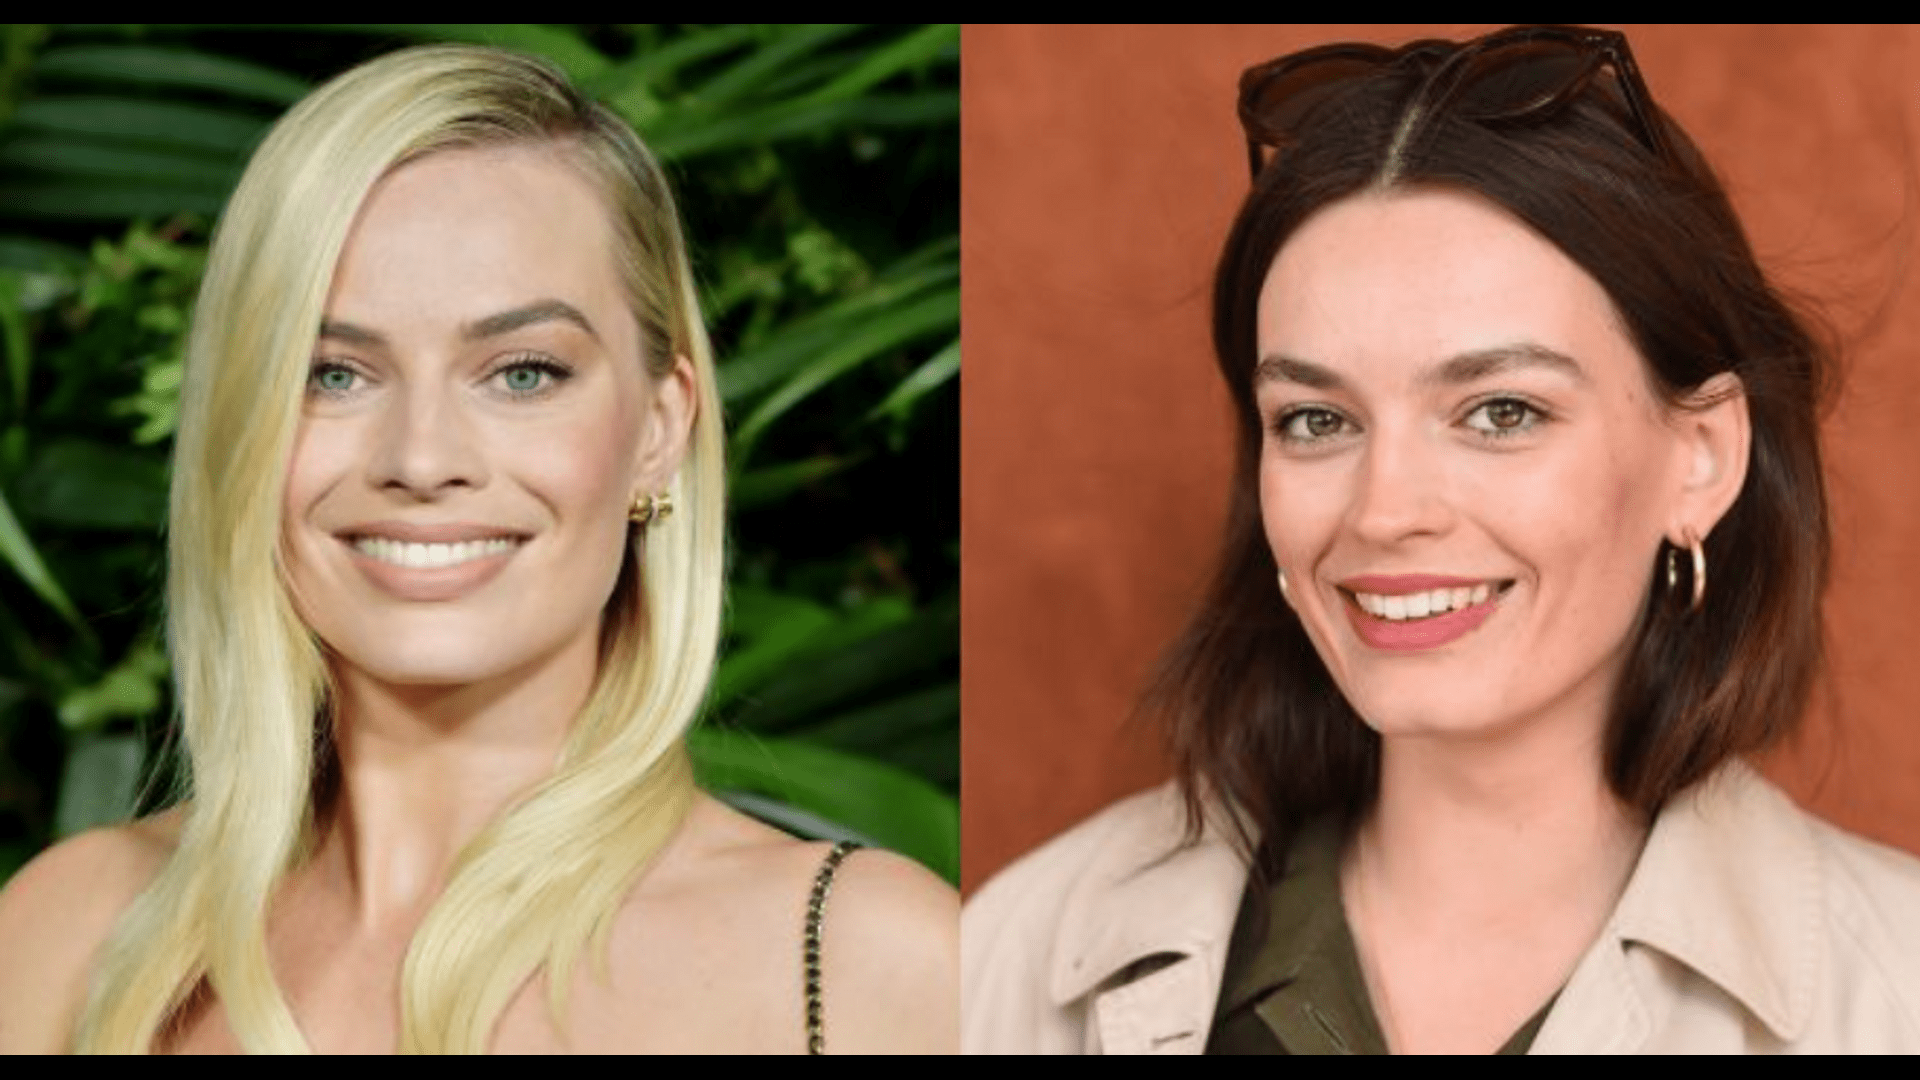 Margot Robbie and Emma Mackey will be together in the Barbie movie